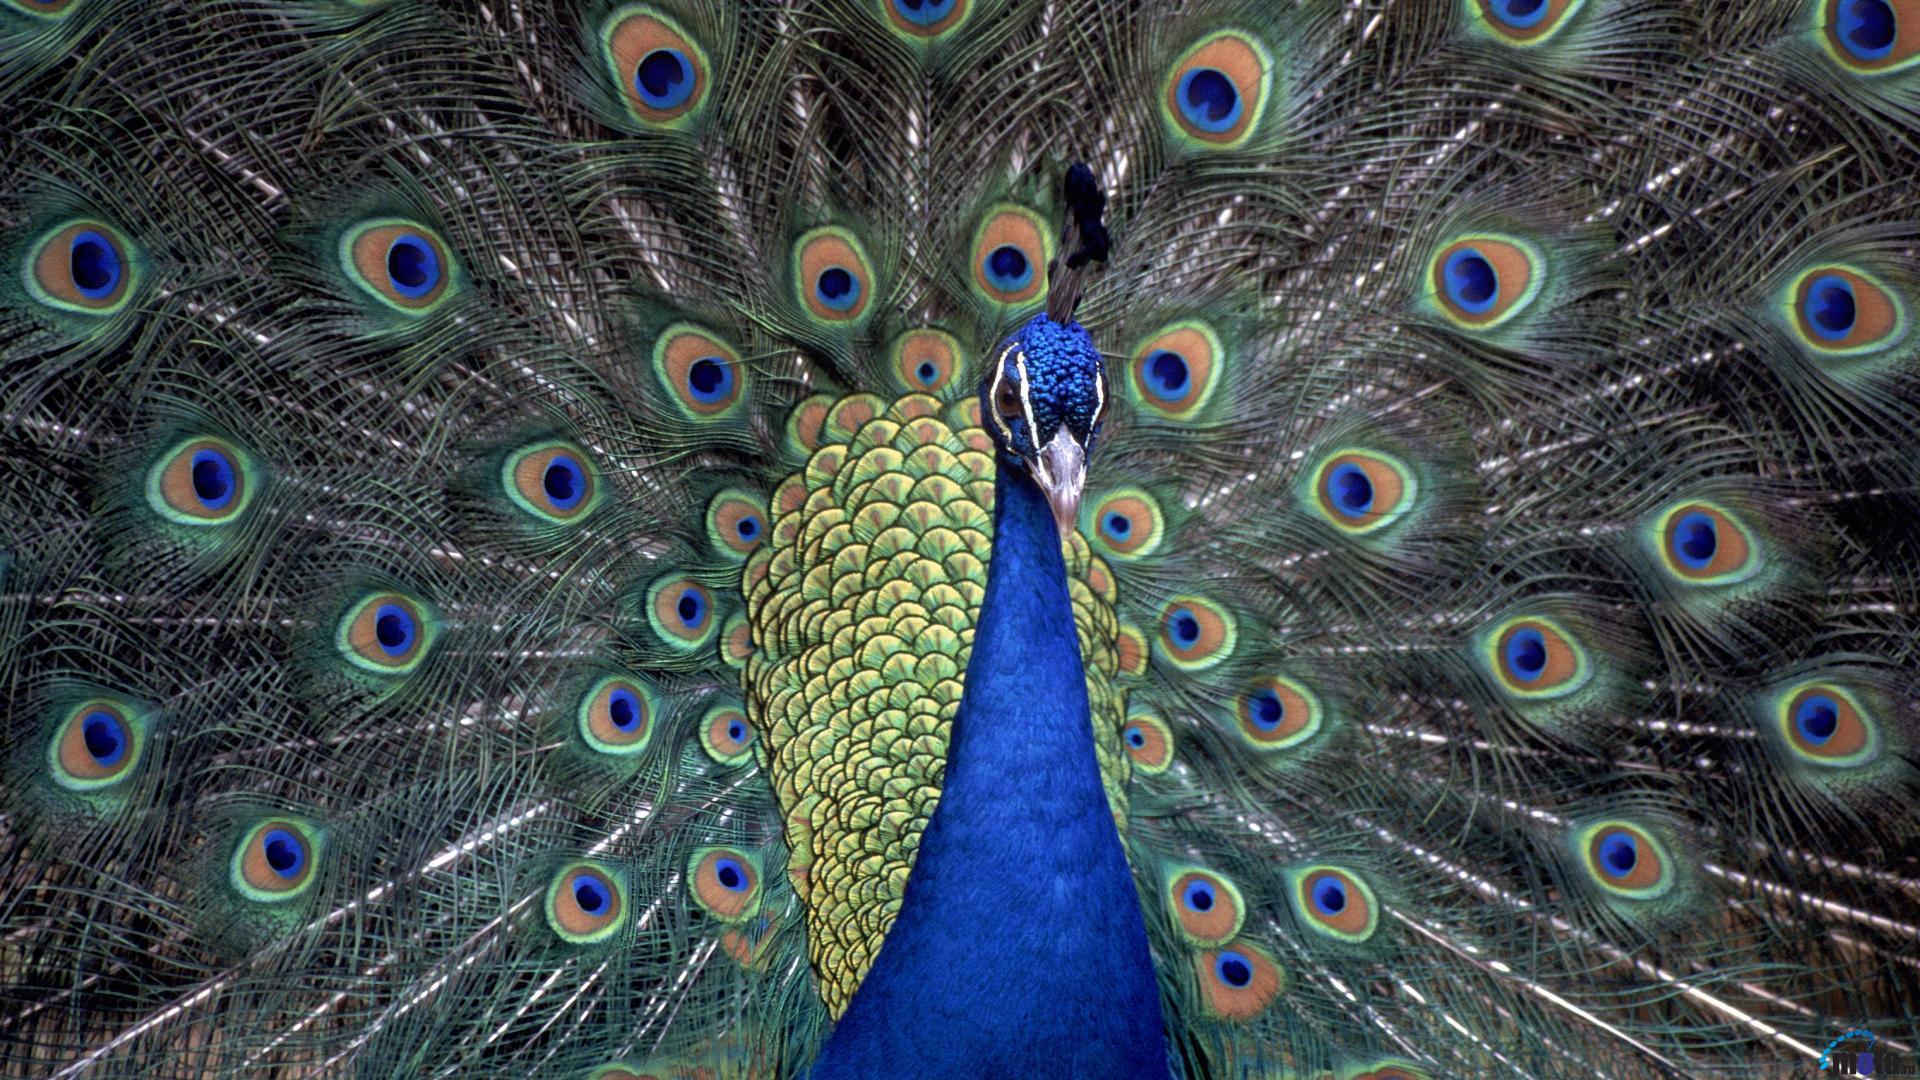 Peacock High Definition Wallpaper Free Download